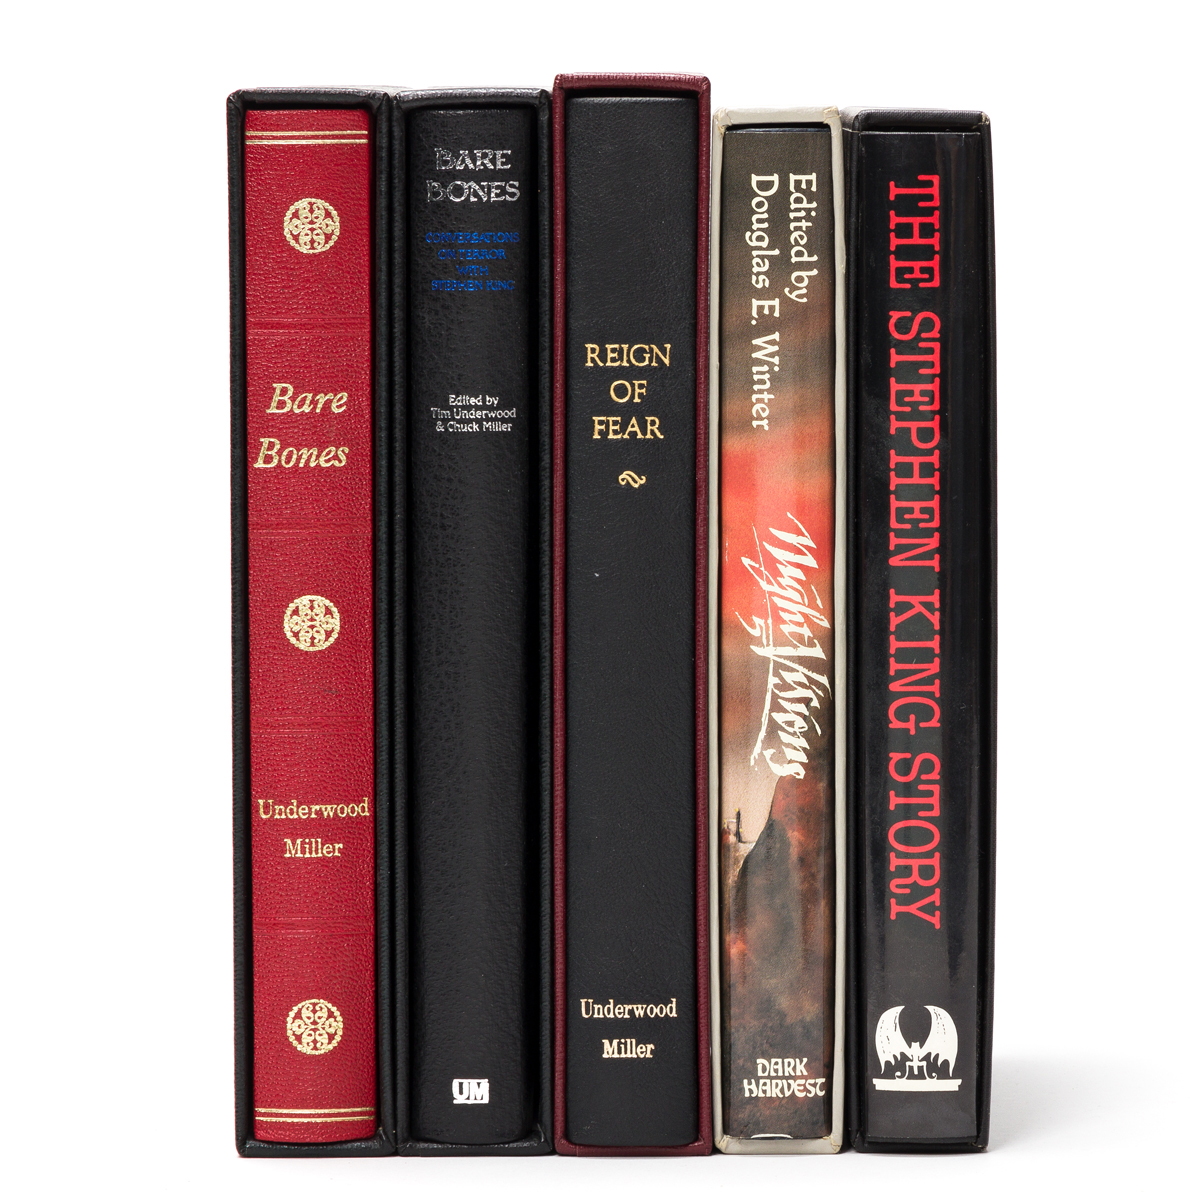 (KING, STEPHEN.) 5 limited first editions on the work of Stephen King.